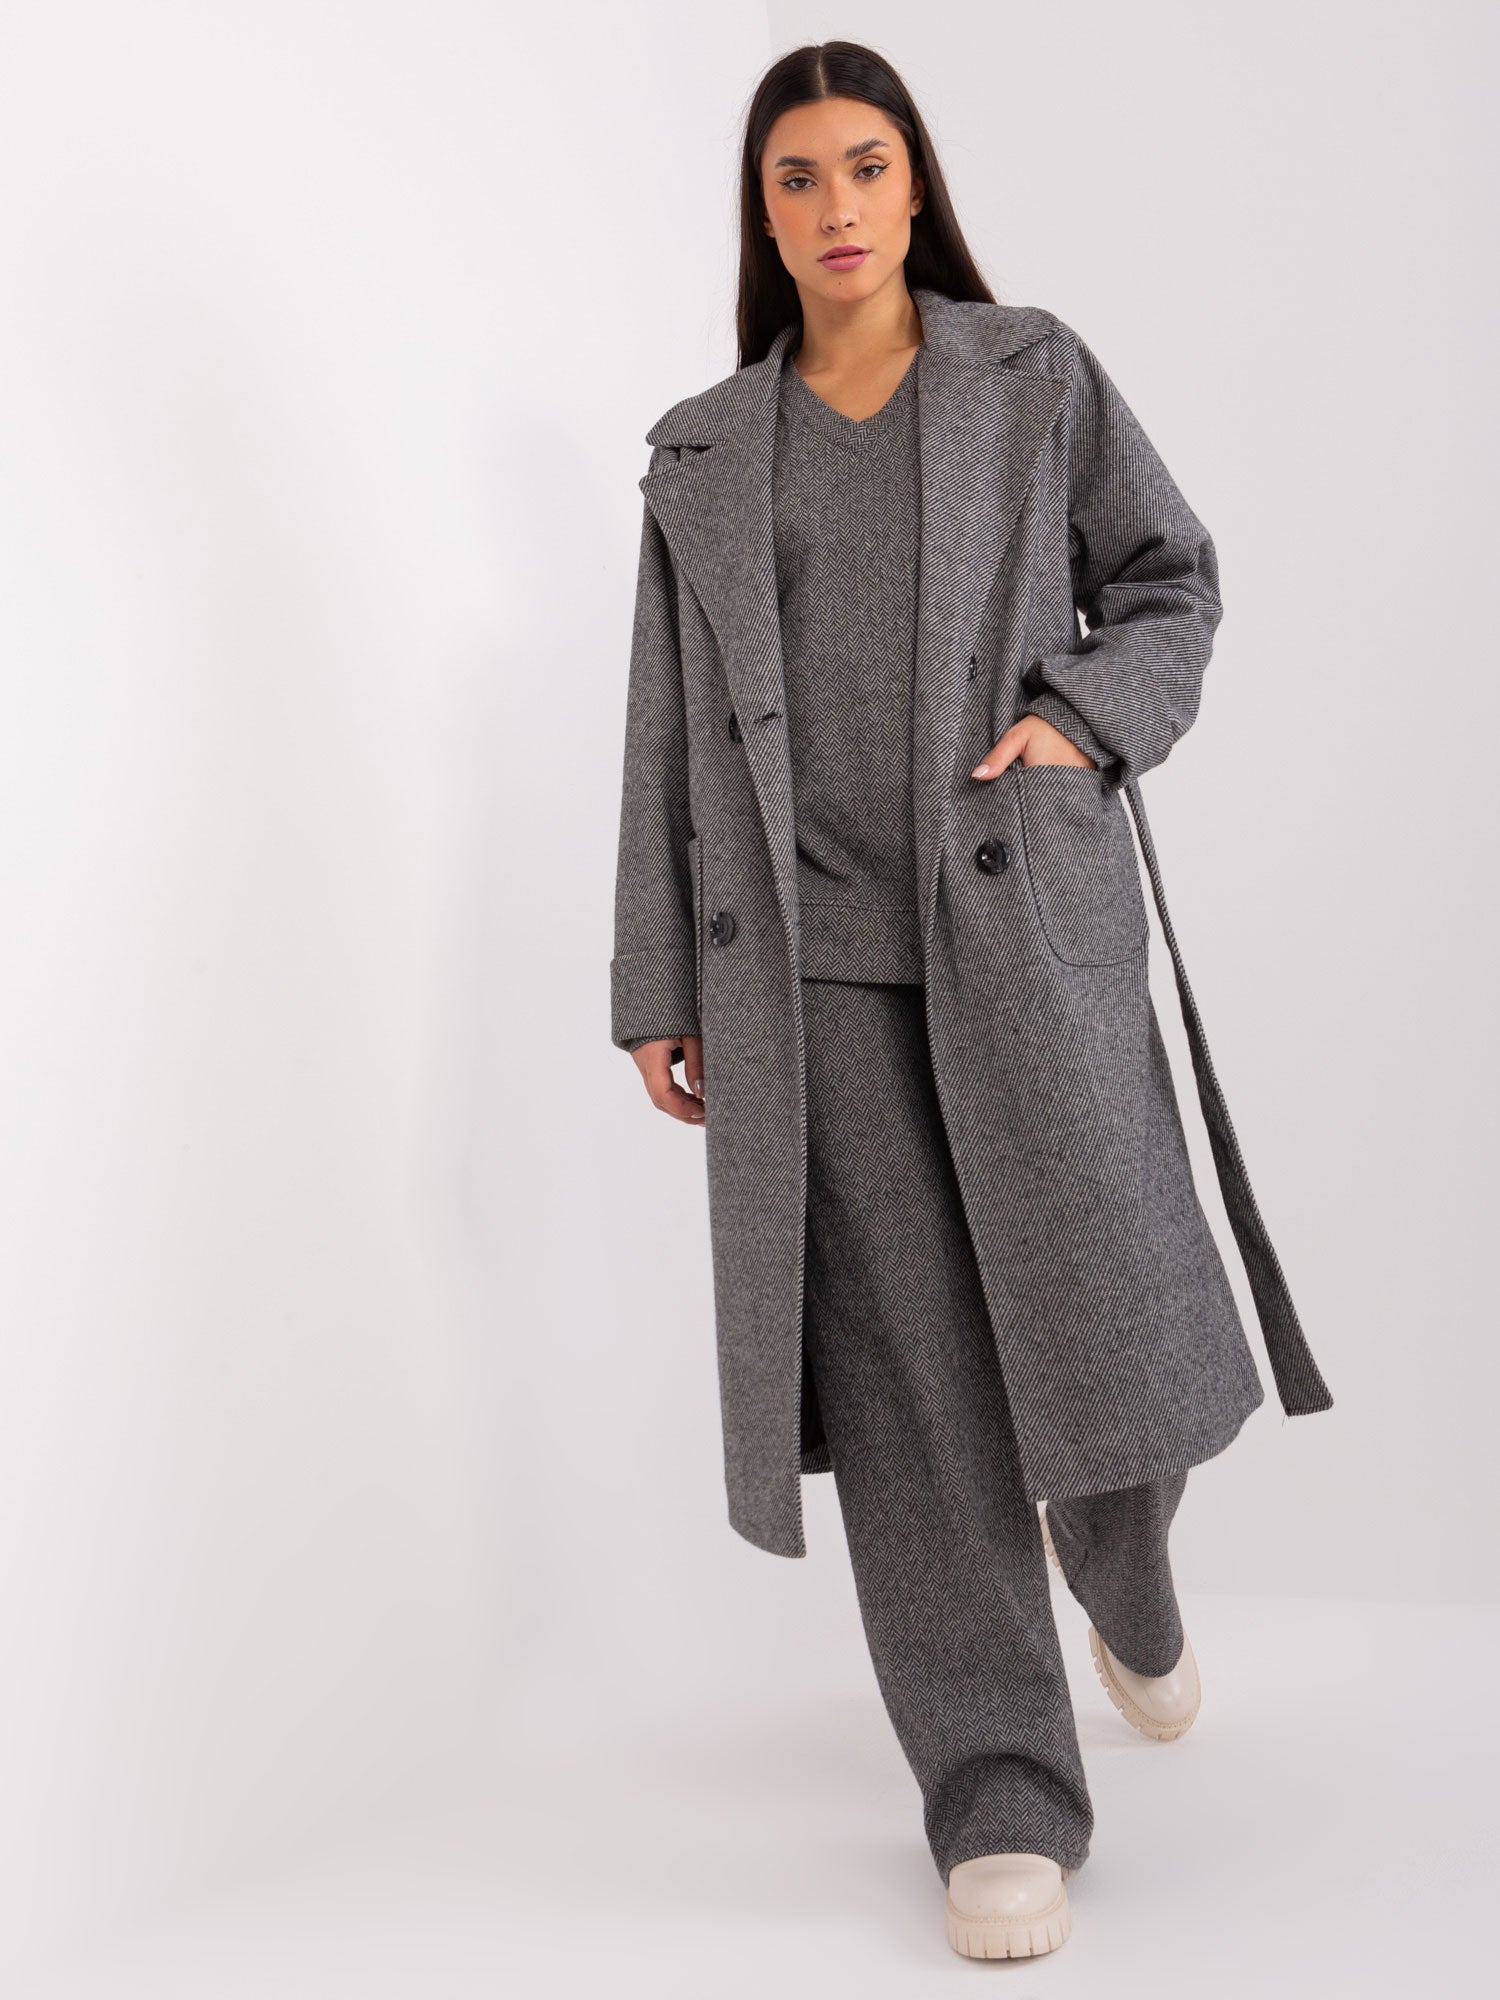 Belted Coat Grey Transitional Striped